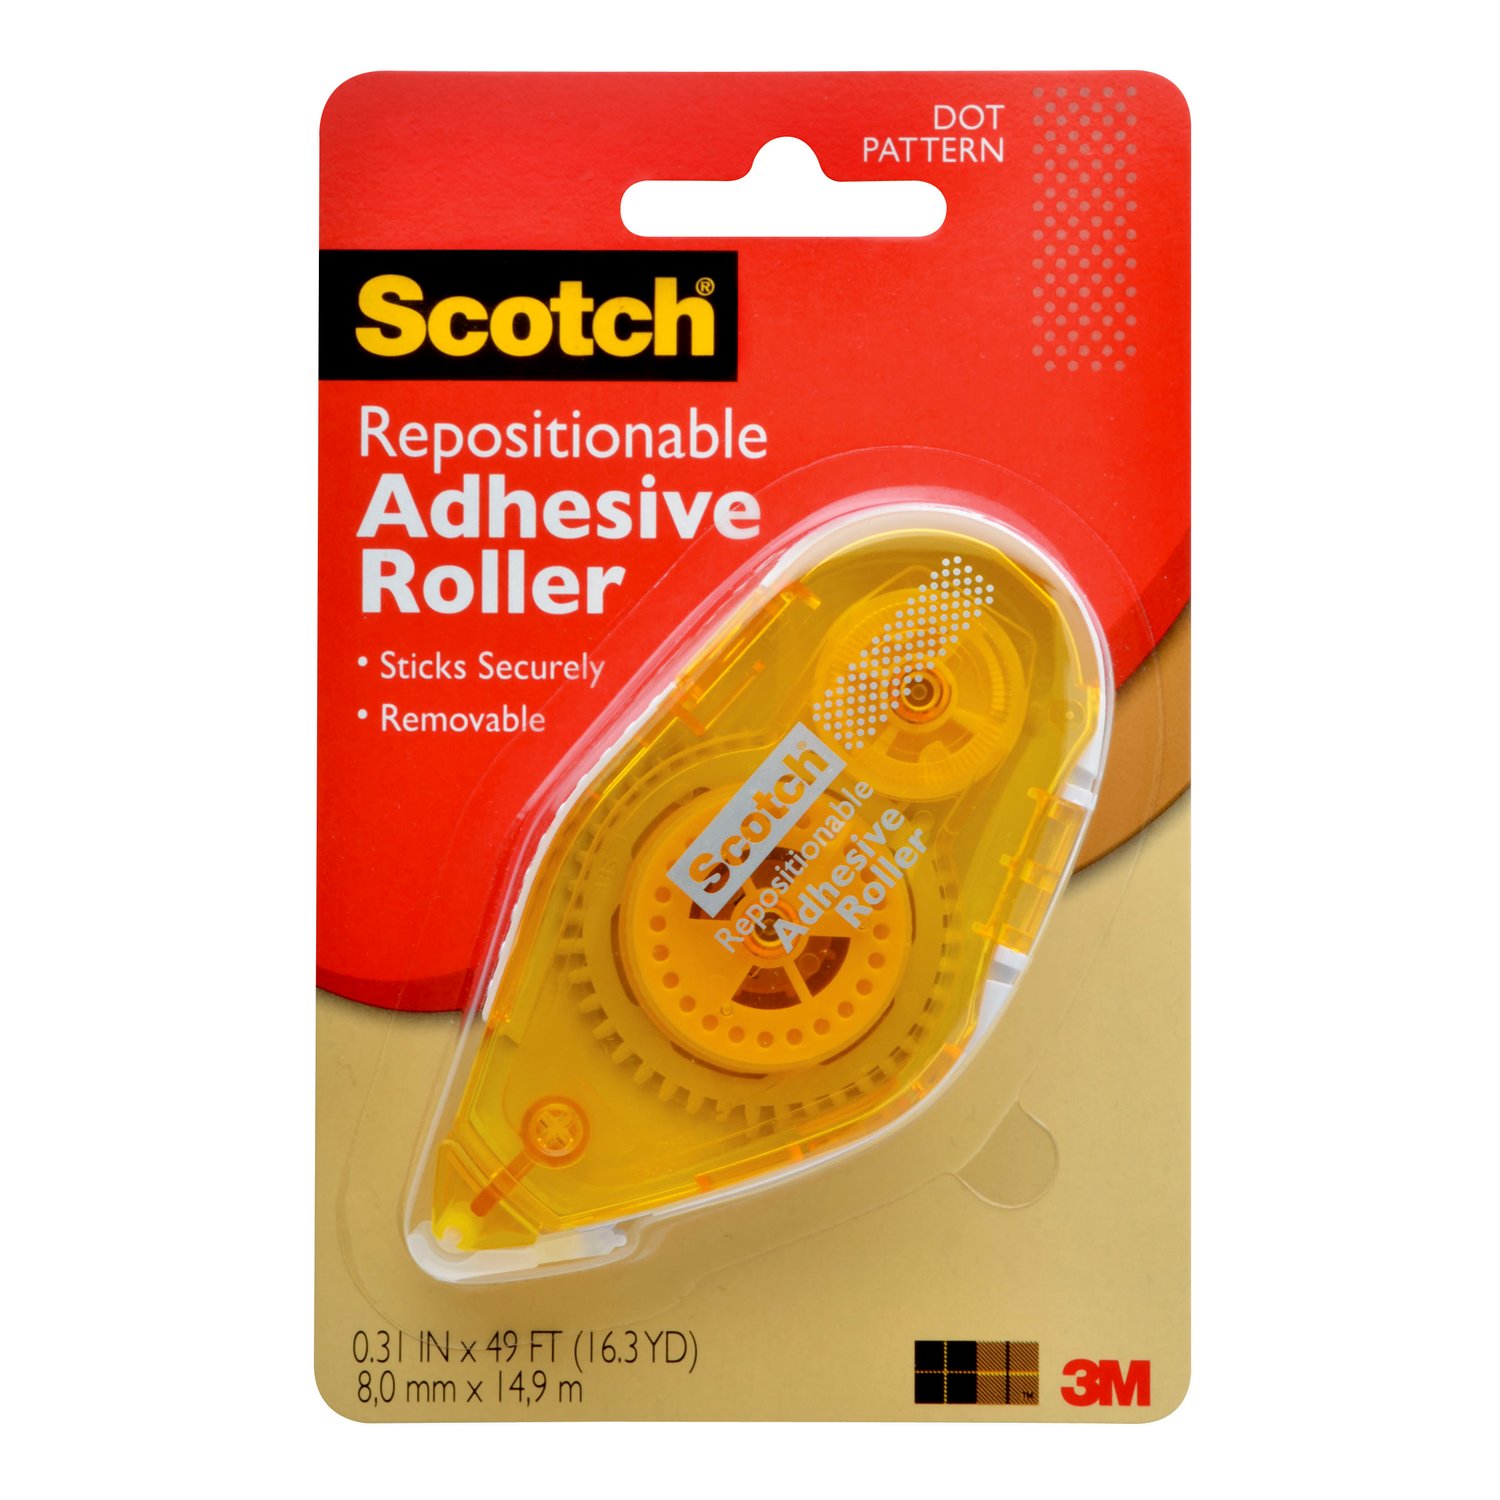 7100272657 - Scotch Adhesive Roller Repositionable 6055-RPS, .31 in x 49 ft